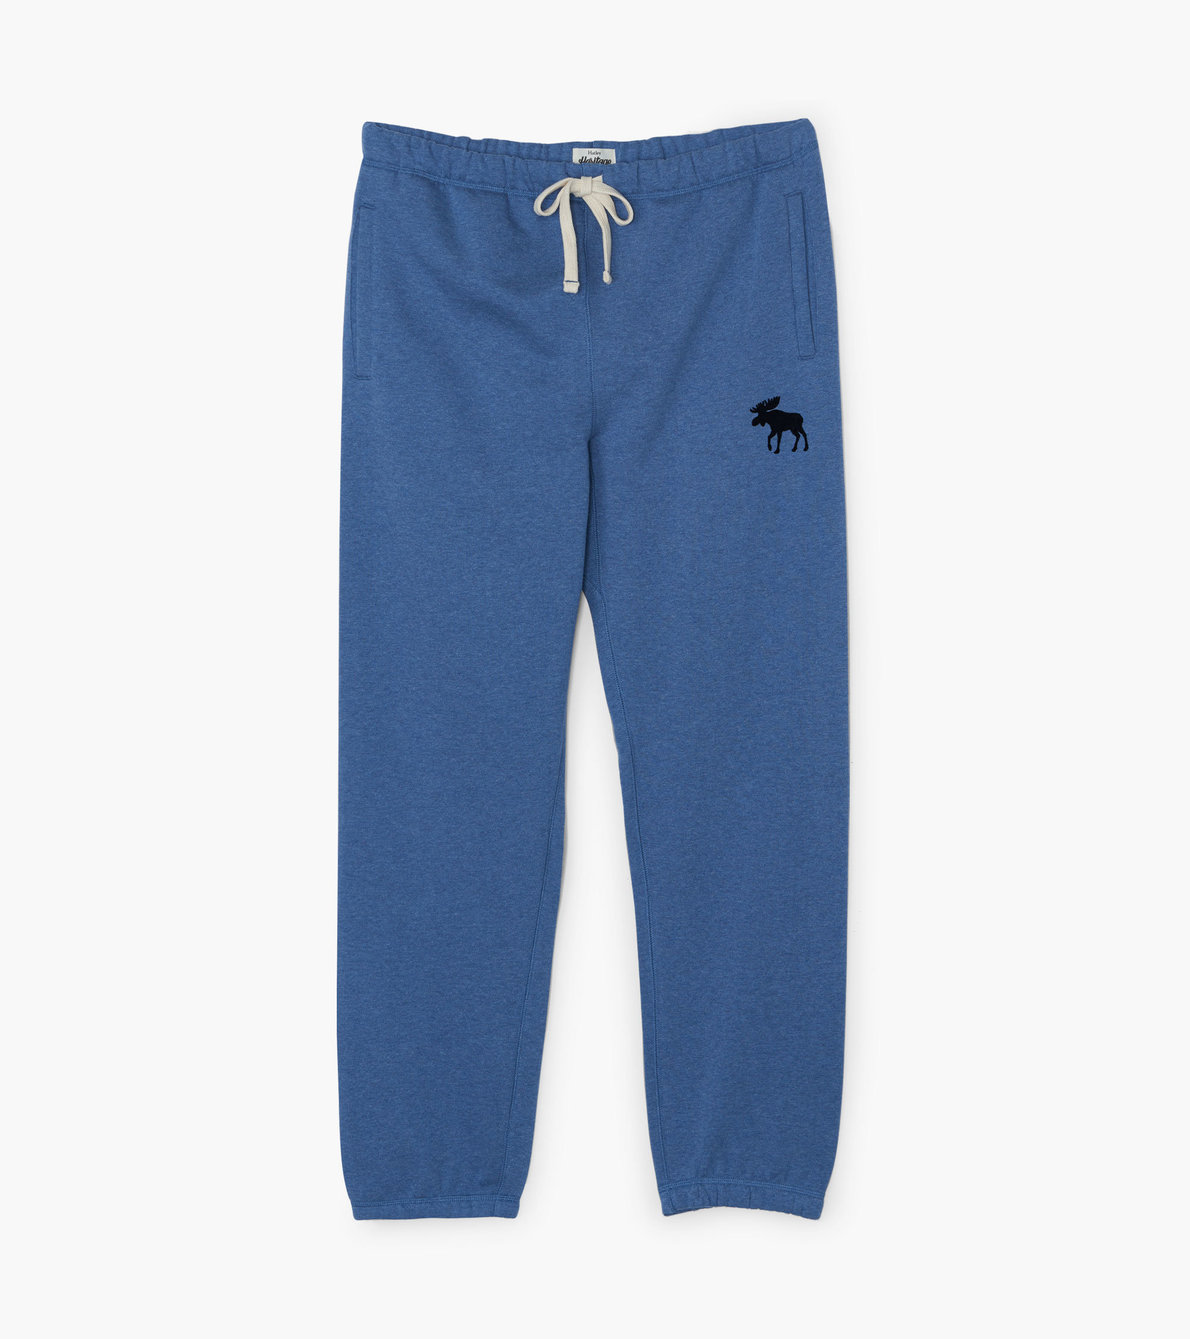 View larger image of Navy Moose Men's Heritage Joggers